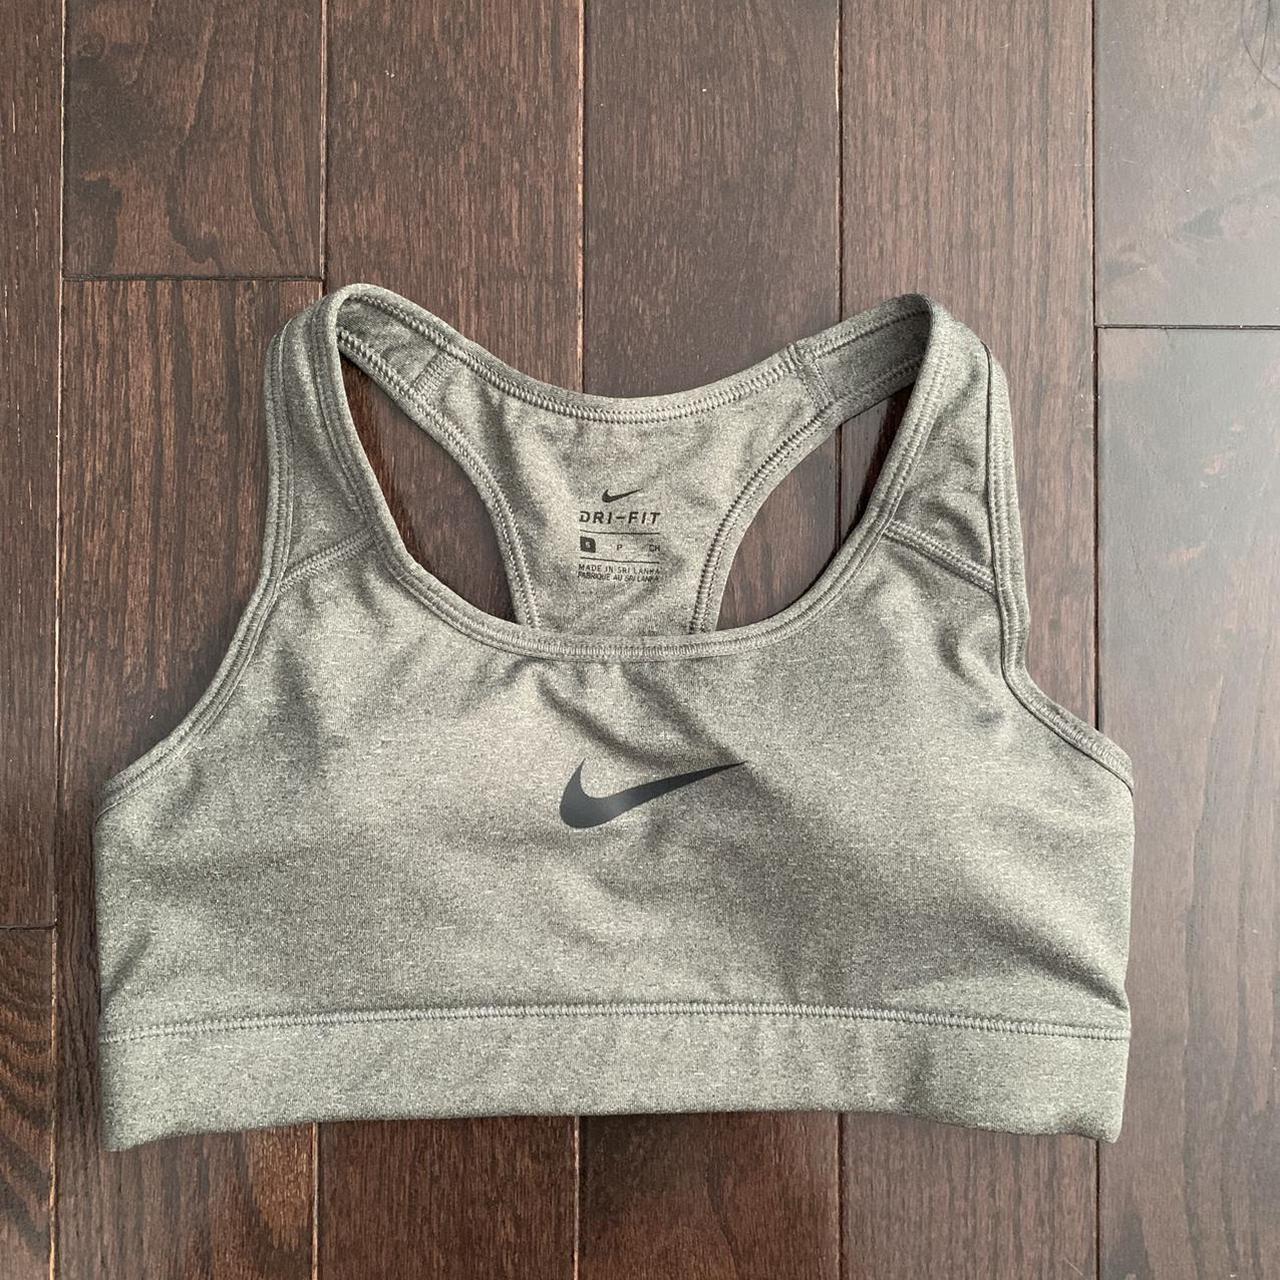 Product Image 1 - Nike Sports Bra

• Good condition
•